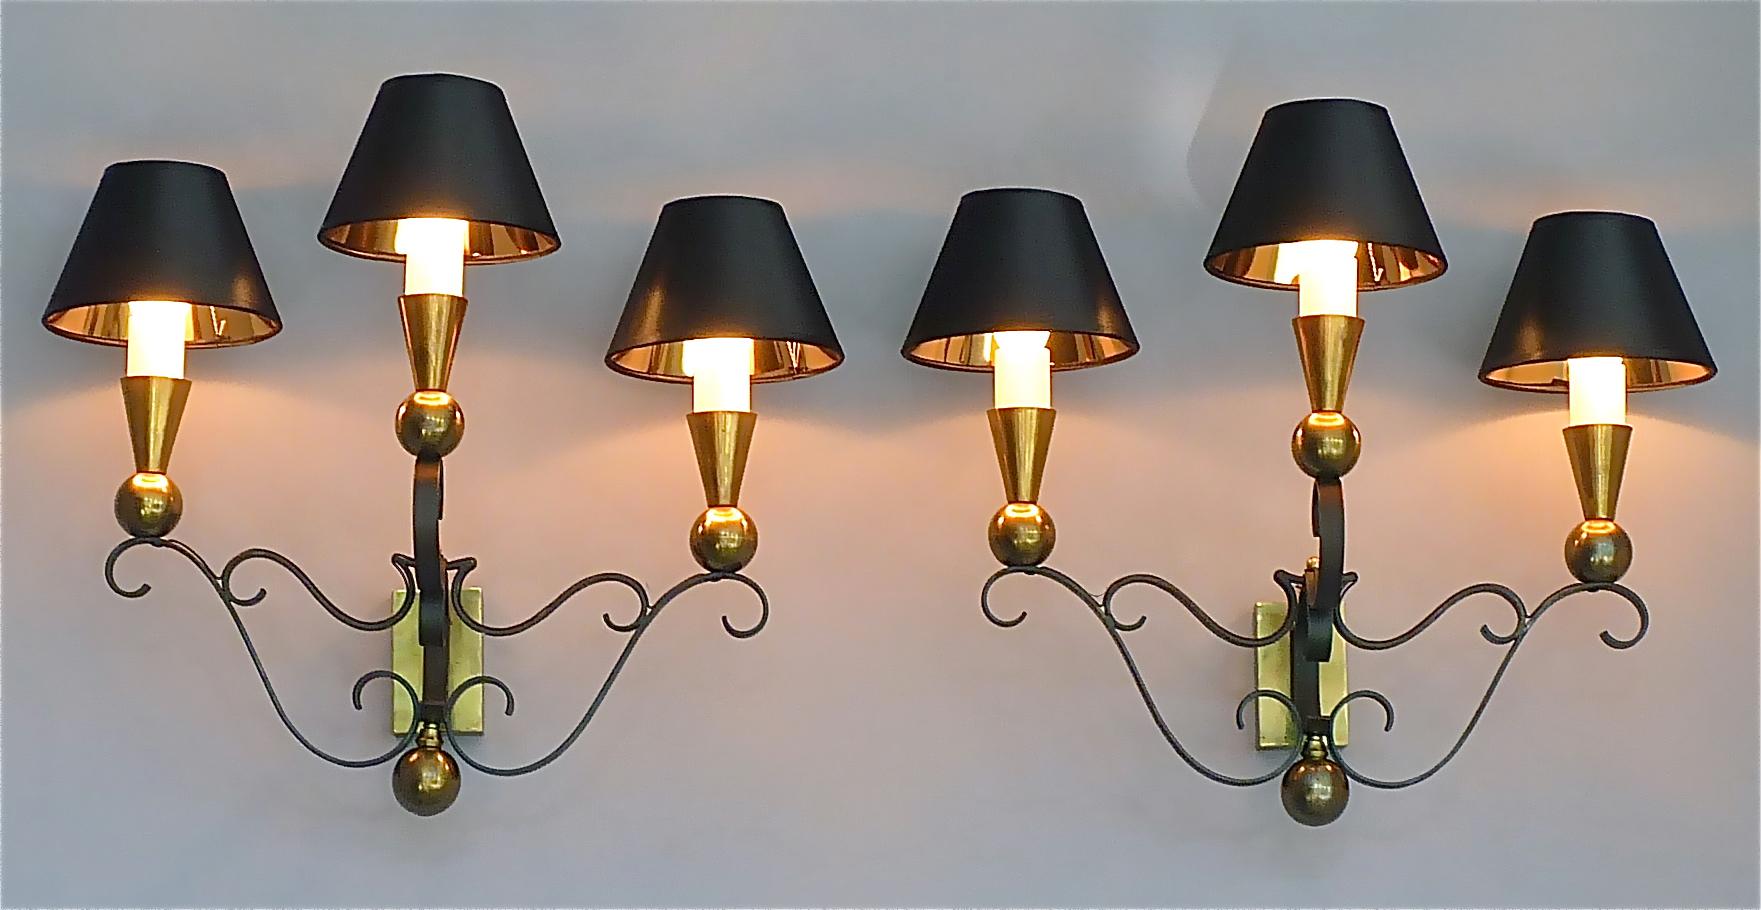 Blackened 3 Rare Sconces Poillerat Adnet Style Black Forged Iron Brass Gold France 1950s For Sale